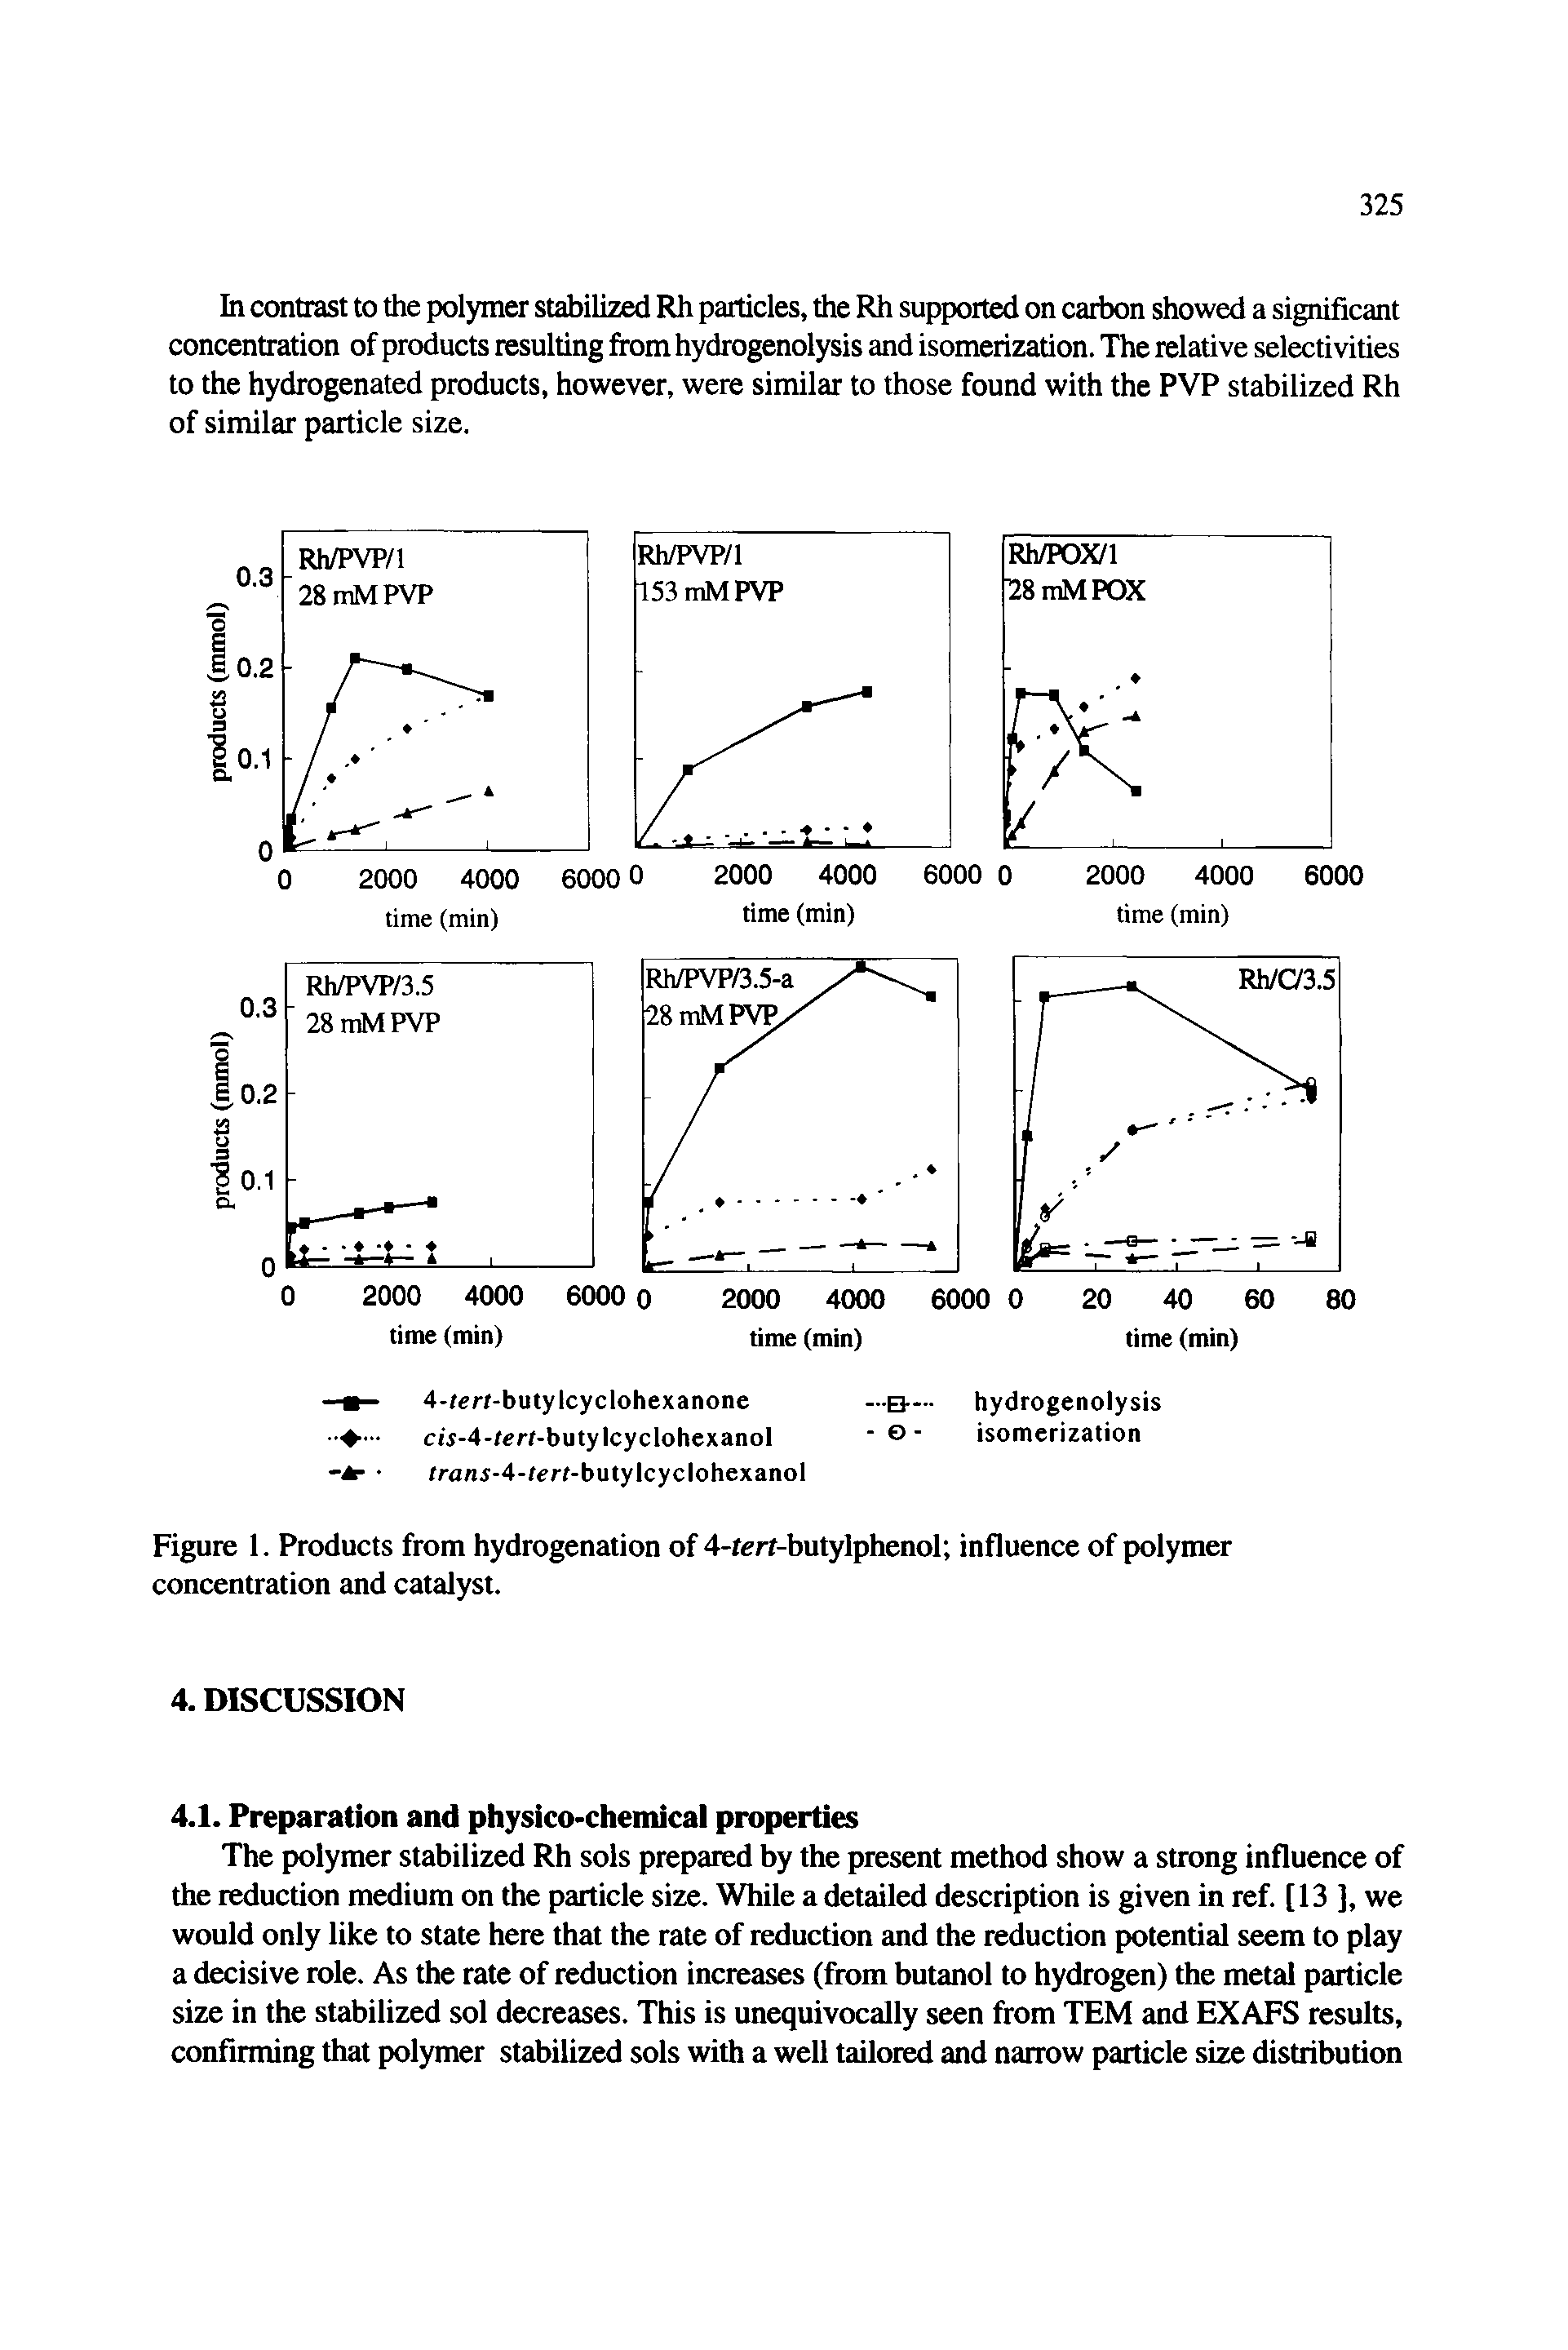 Figure 1. Products from hydrogenation of 4-terf-butylphenol influence of polymer concentration and catalyst.